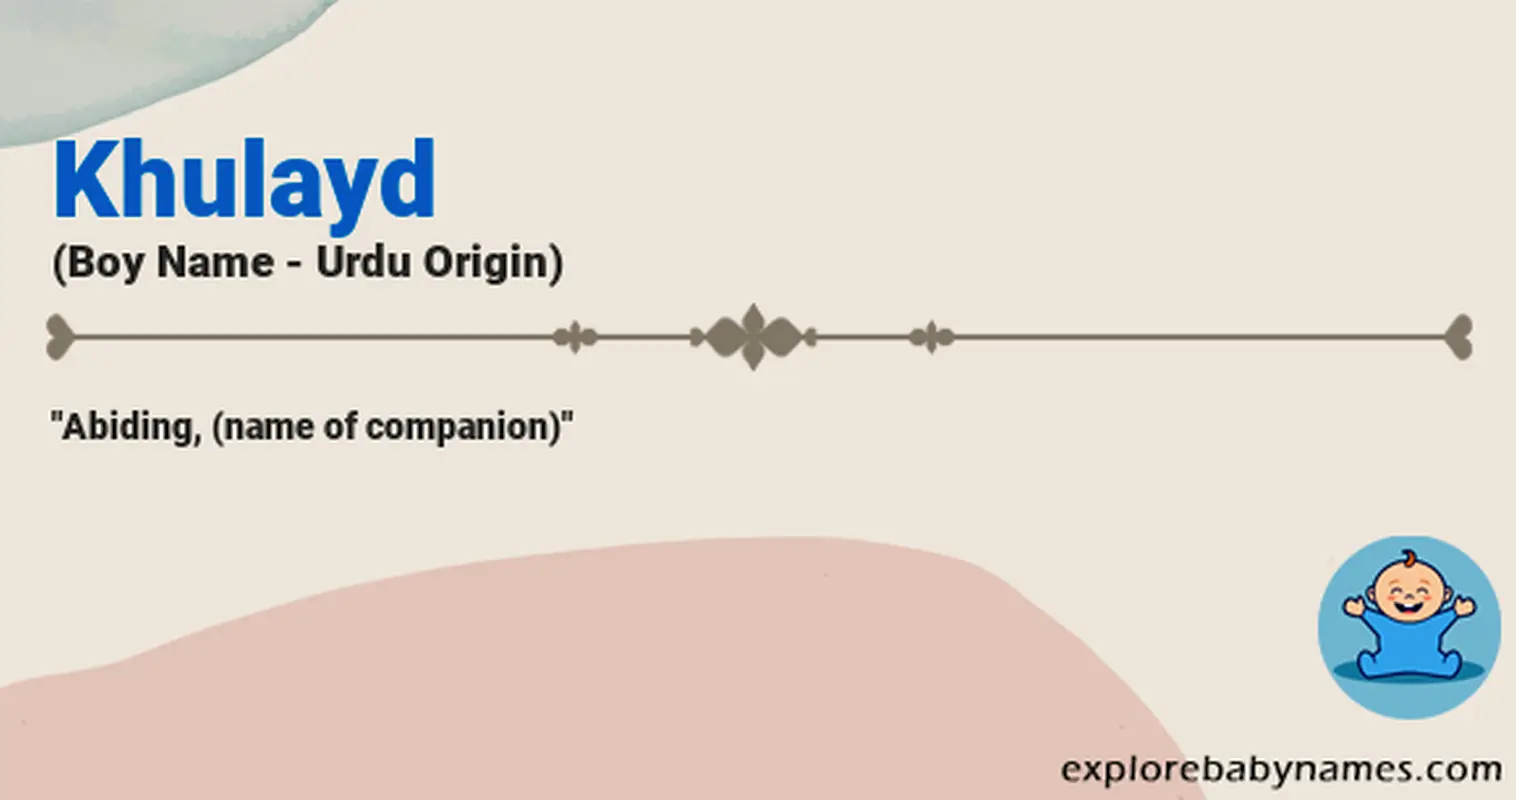 Meaning of Khulayd